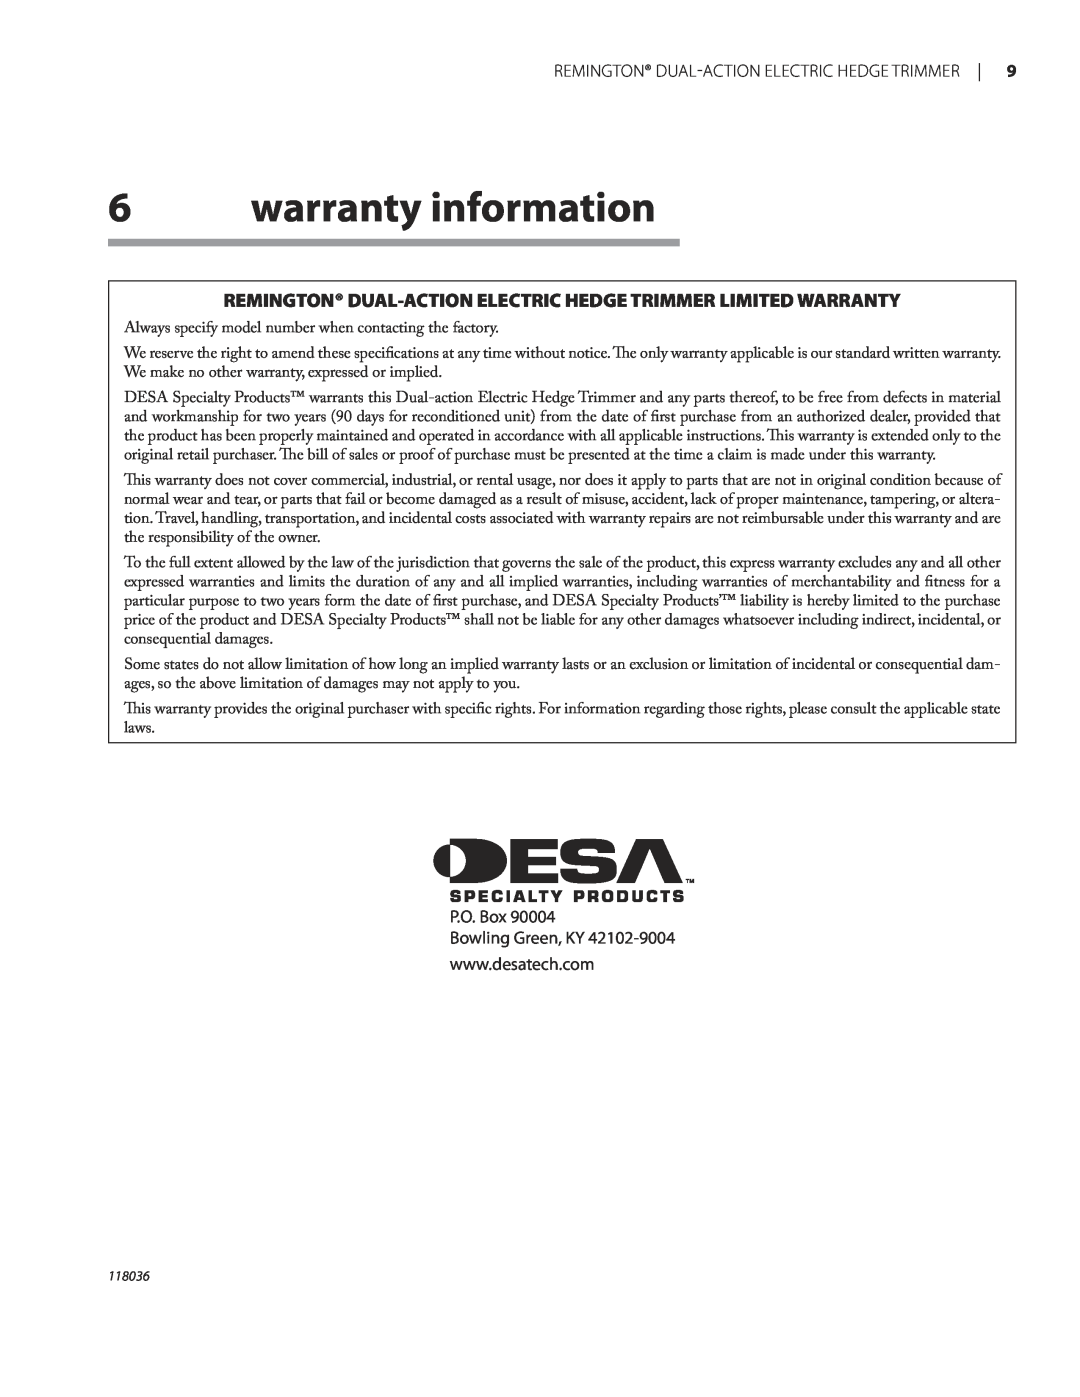 Remington HT3218A, HT4022A owner manual warranty information, Remington Dual-Actionelectric Hedge Trimmer 